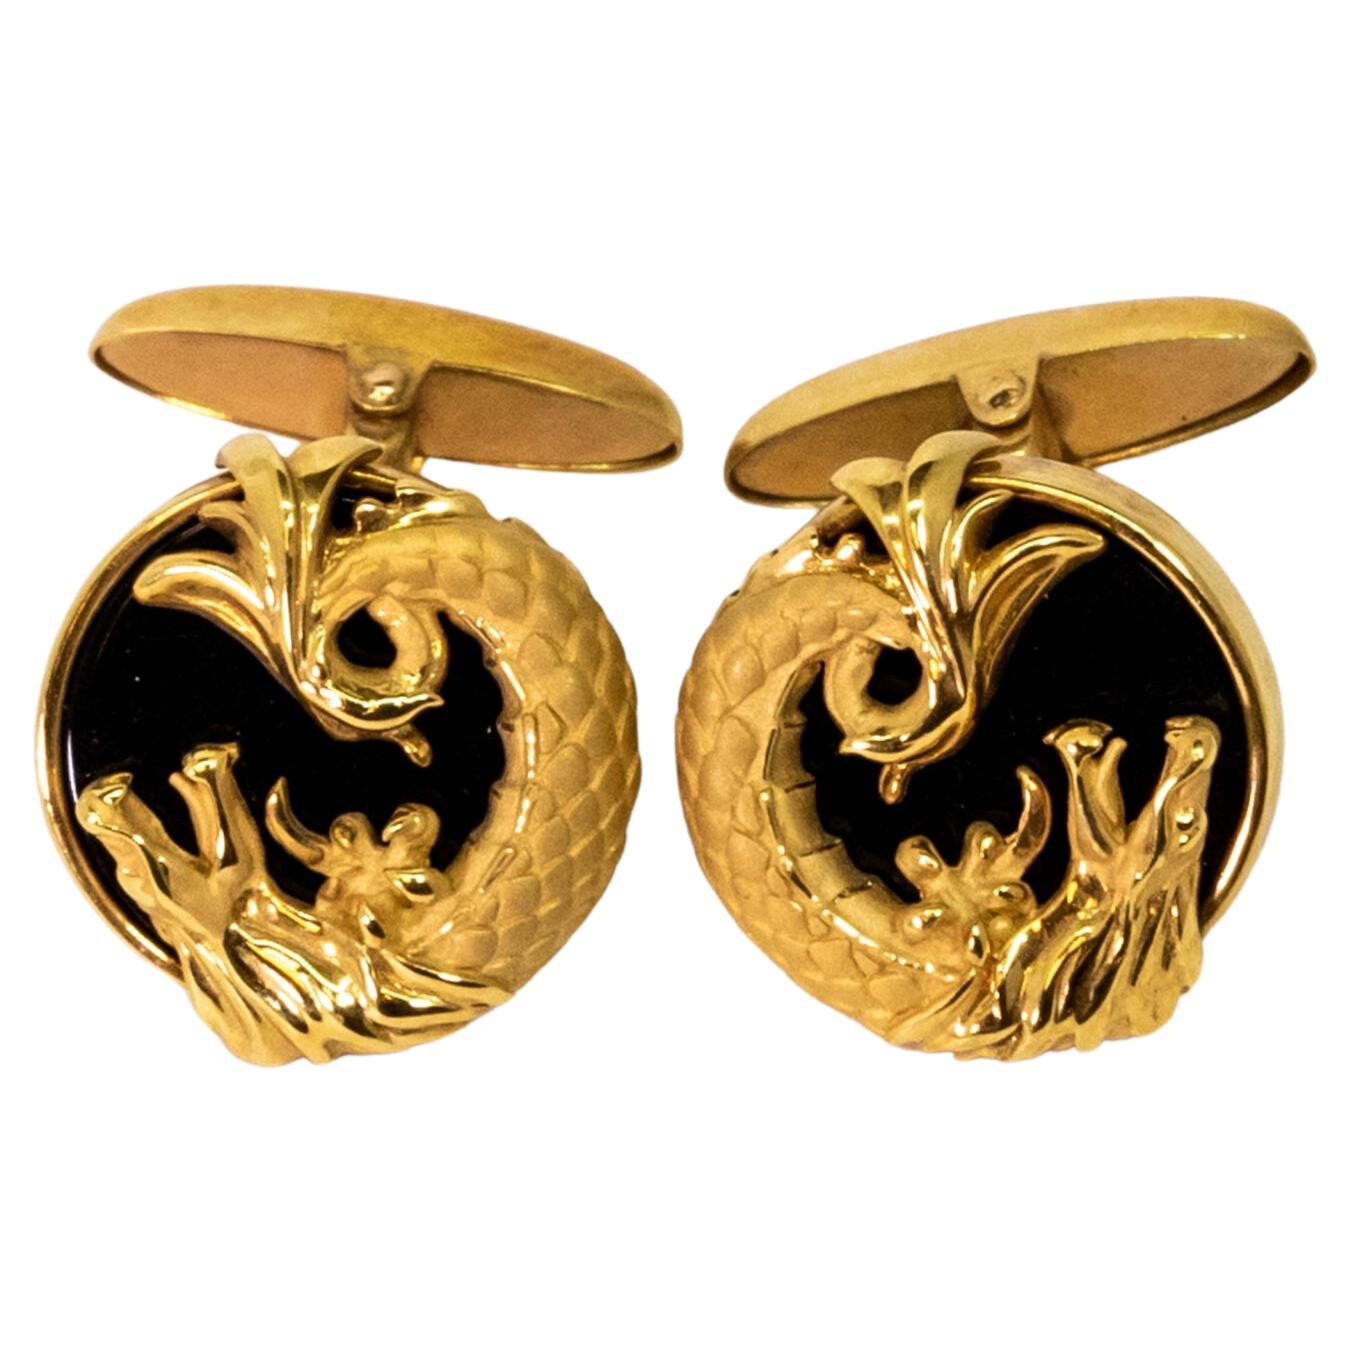 Carrara Y Carrara Circles of Fire 18k Yellow Gold and Onyx Cufflinks, 10076462 For Sale